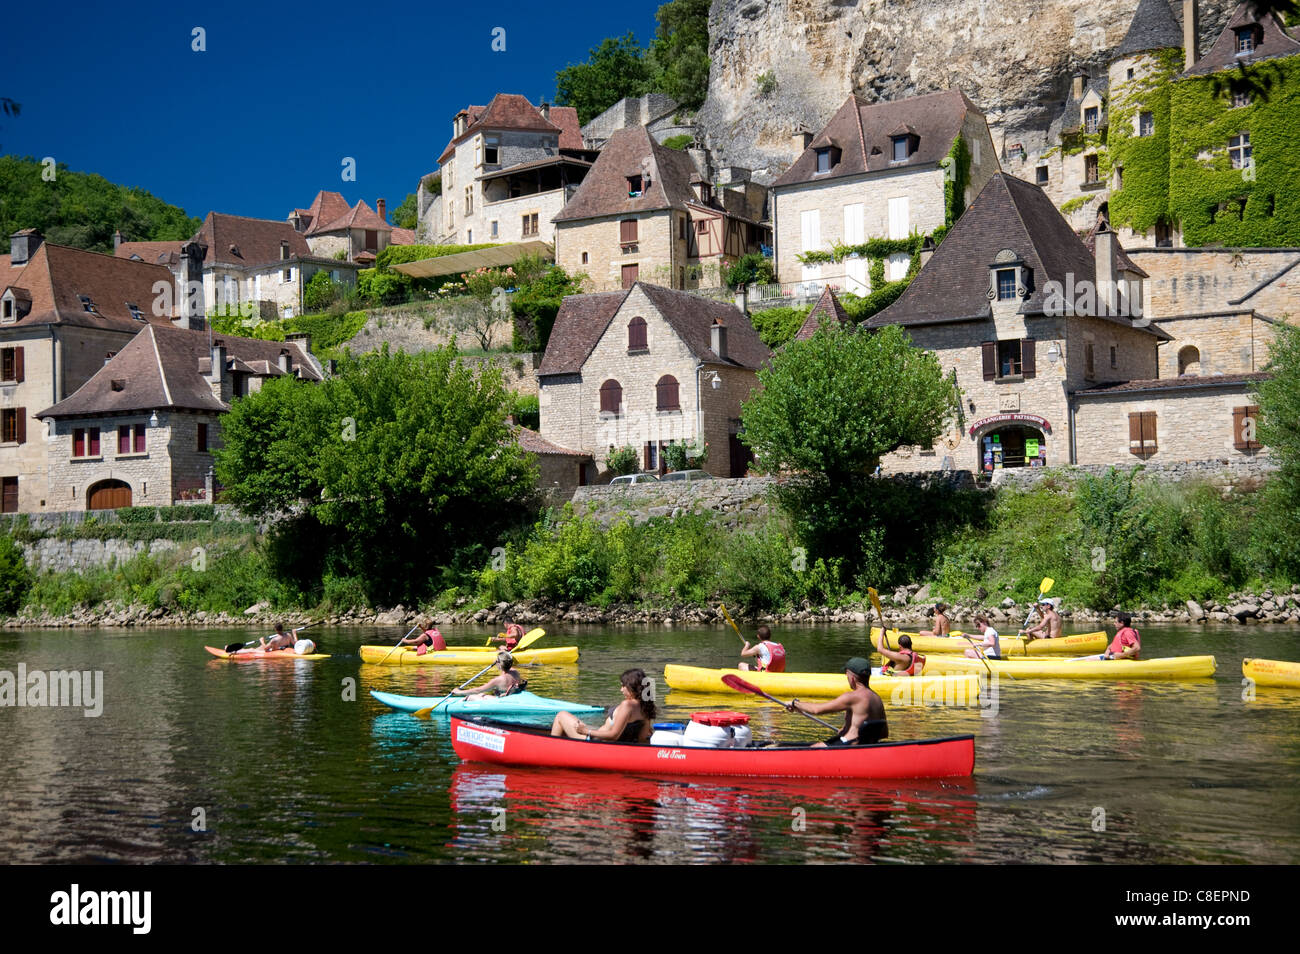 People in canoes on the Dordogne River near La Roque-Gageac, Dordogne, France Stock Photo